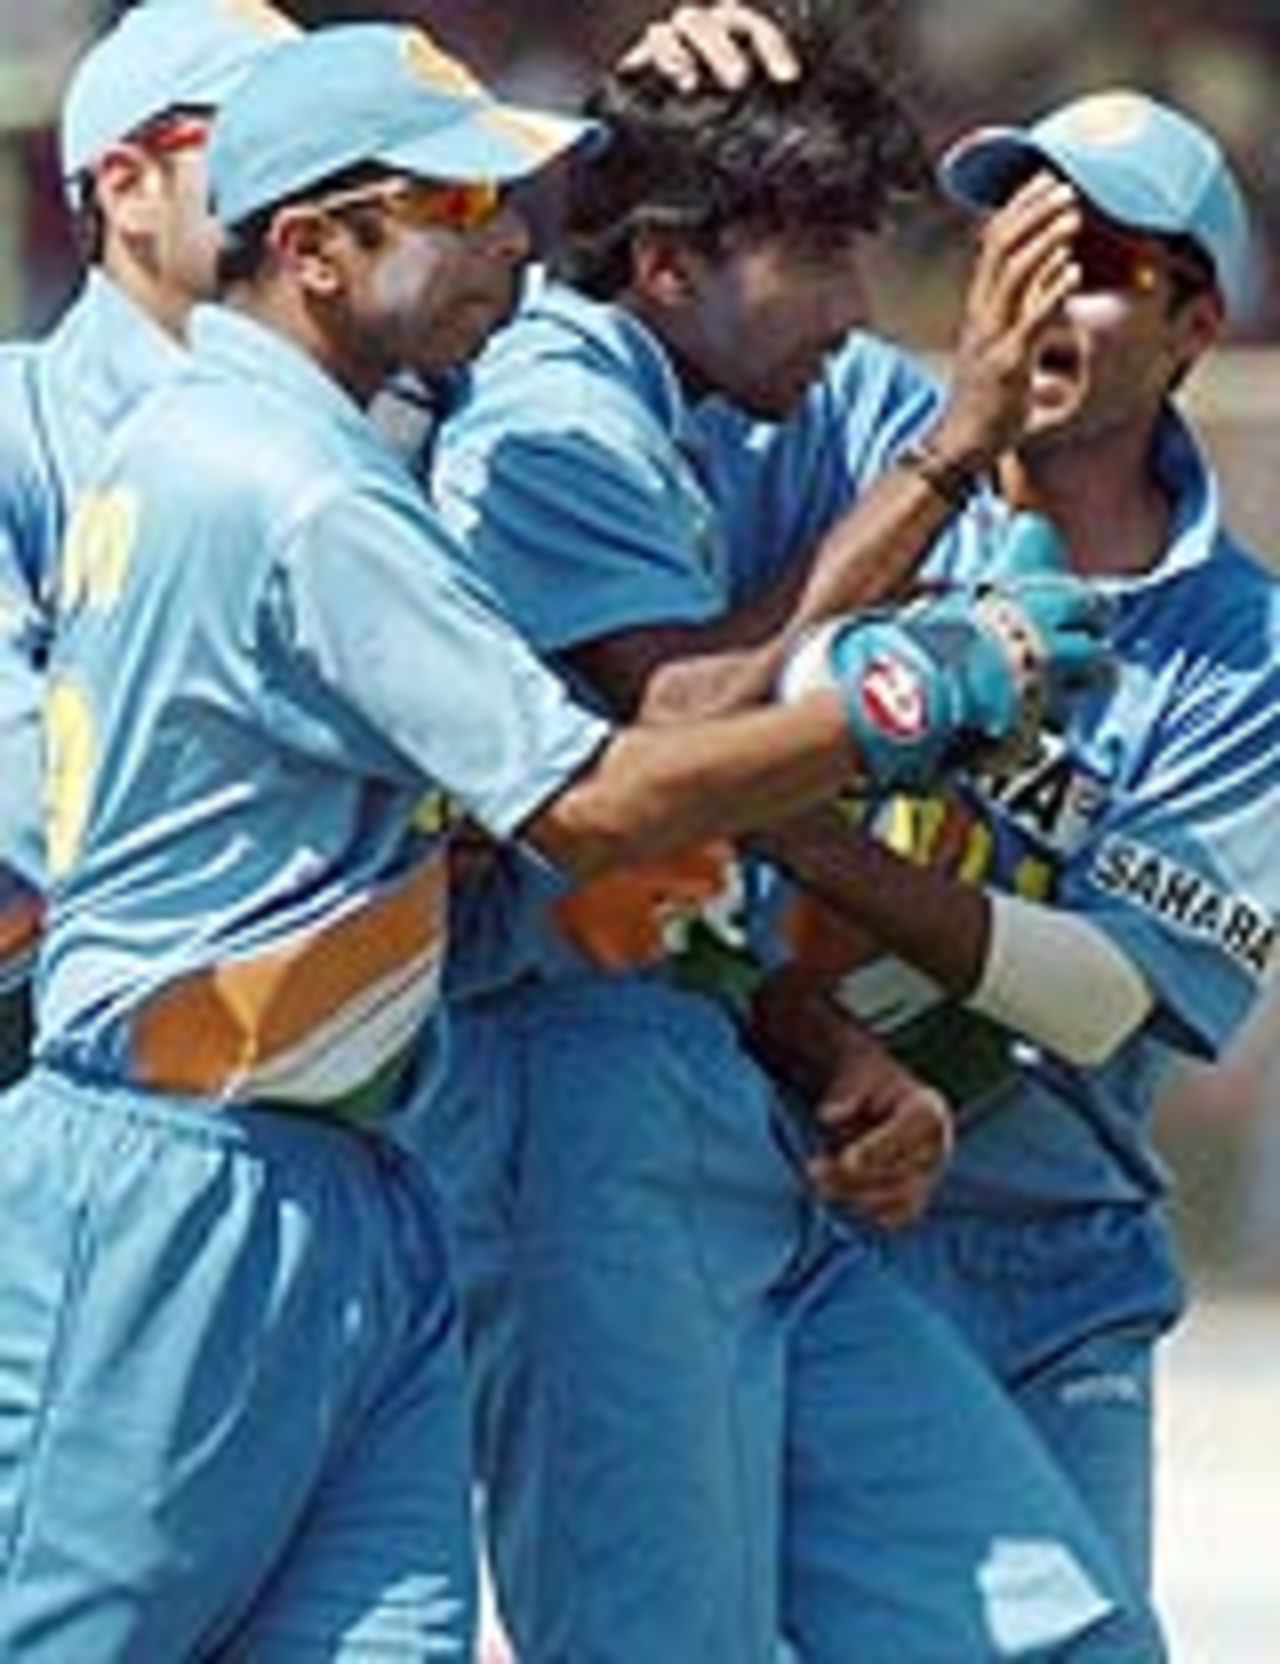 Laxmipathy Balaji is congratulated by his team-mates for the wicket of Yasir Hameed, Pakistan v India, 1st ODI, Karachi, March 13, 2004